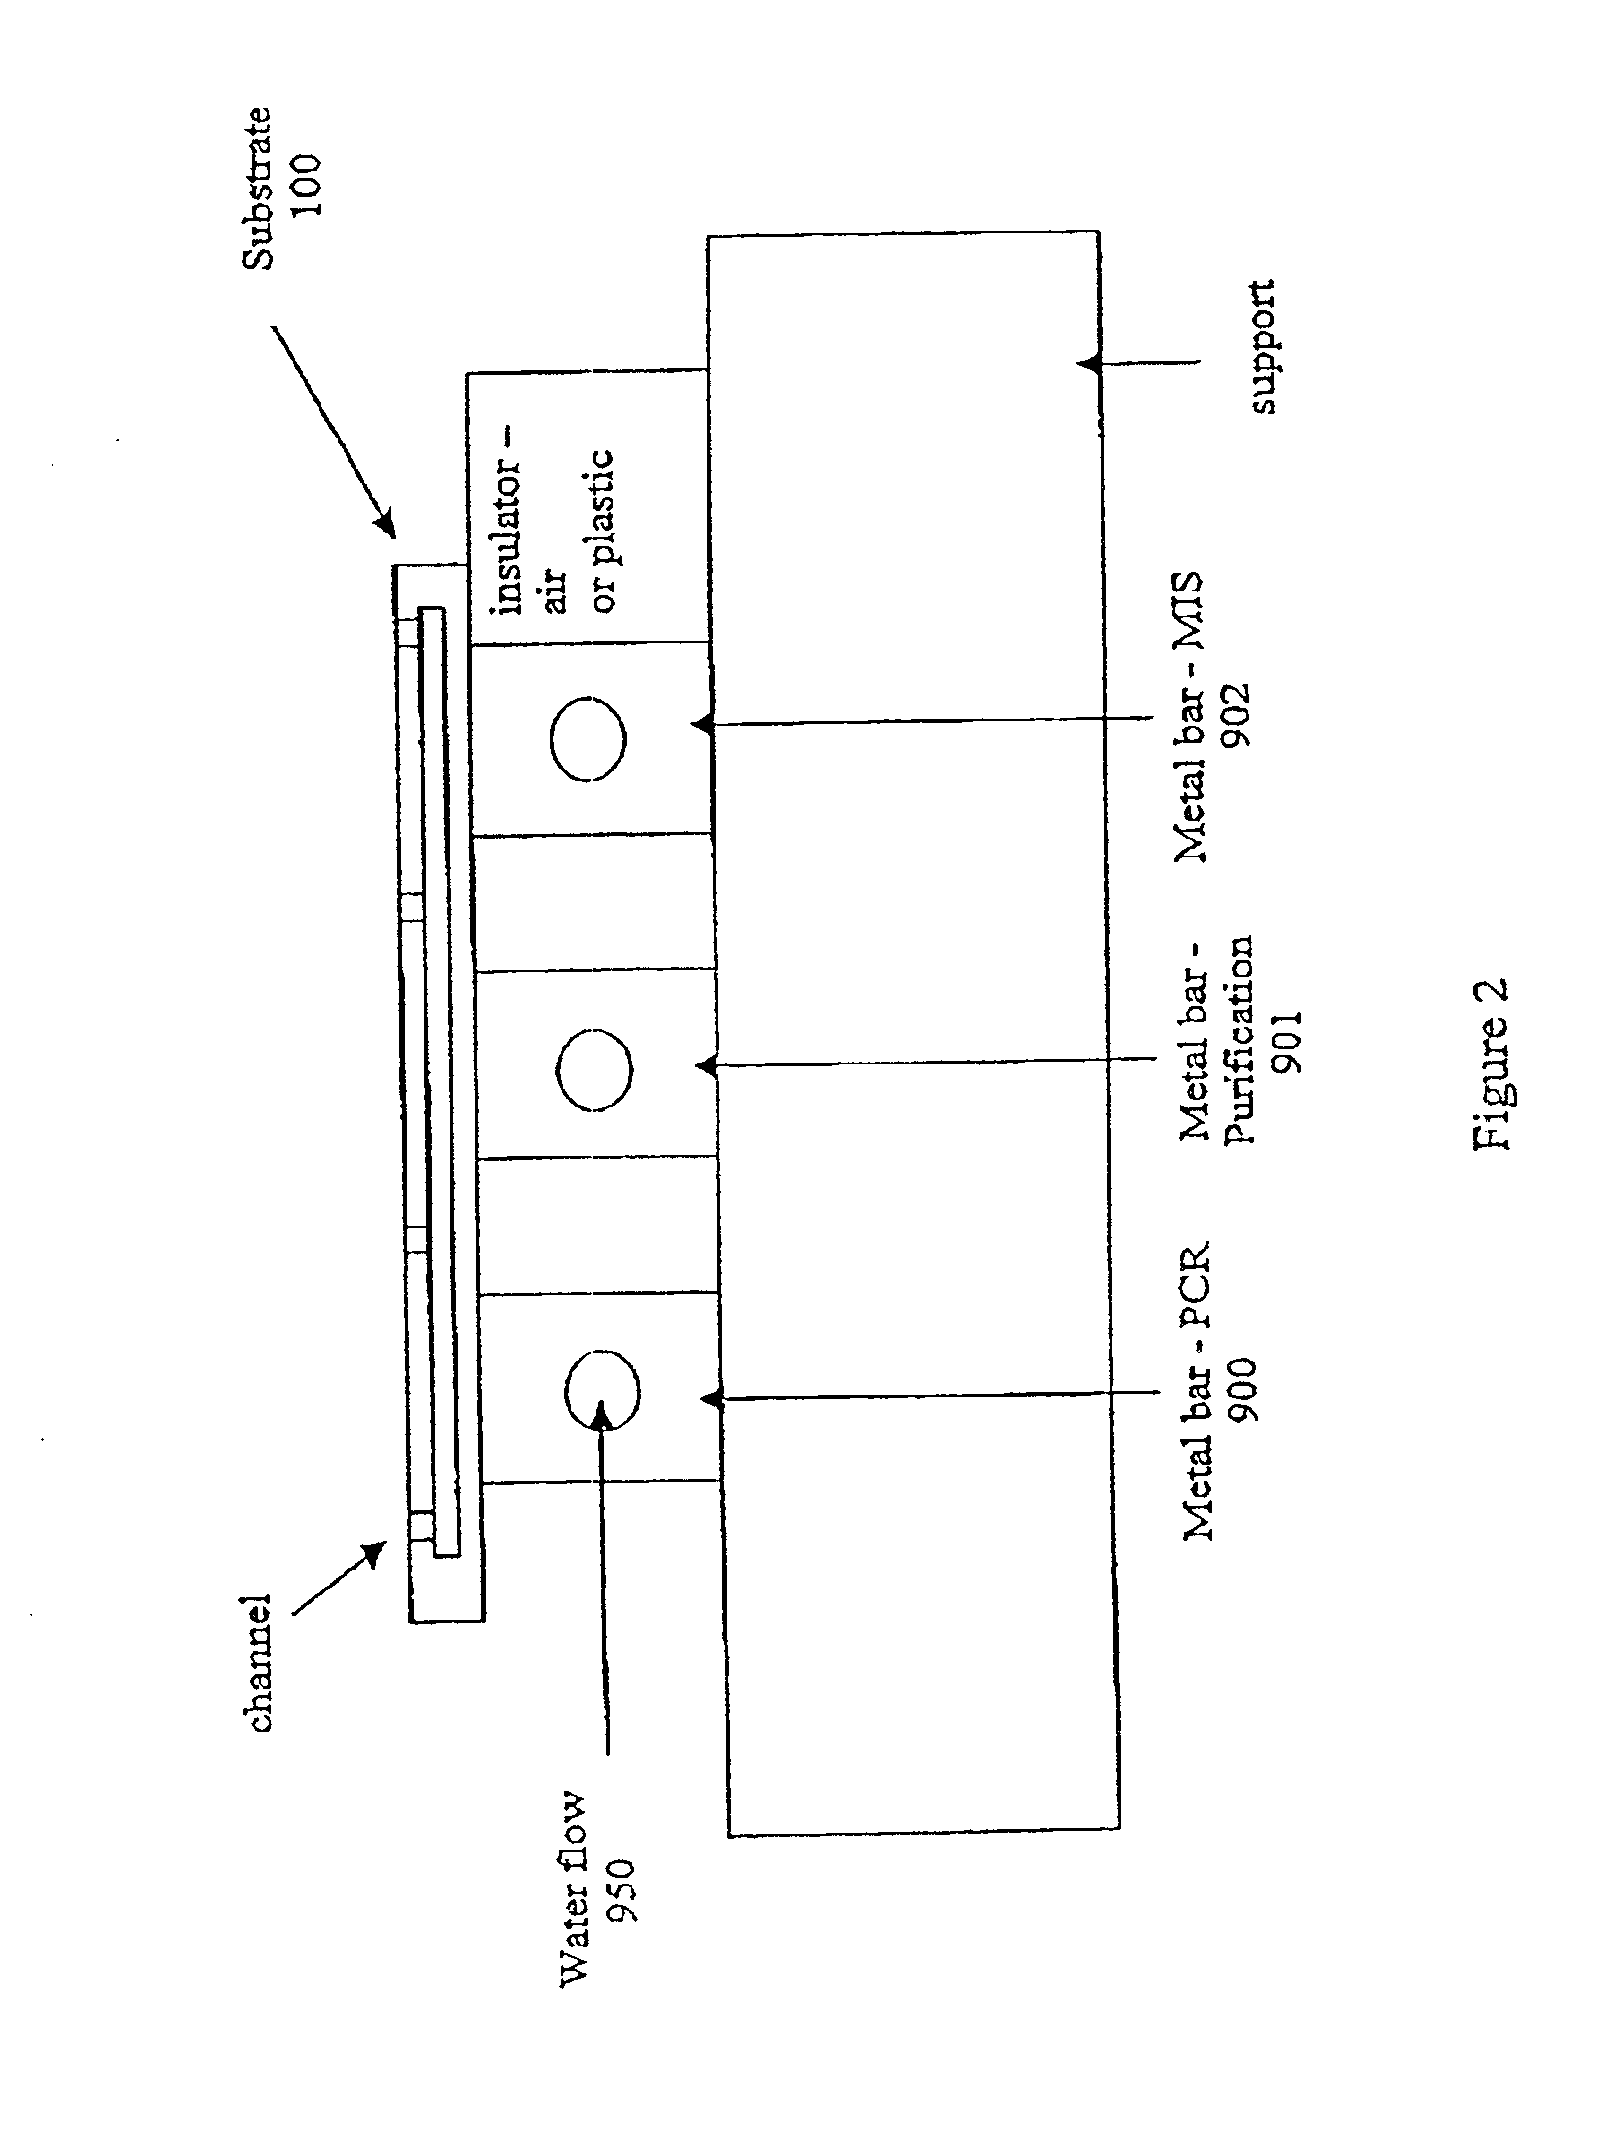 Method for carrying out a biochemical protocol in continuous flow in a microreactor